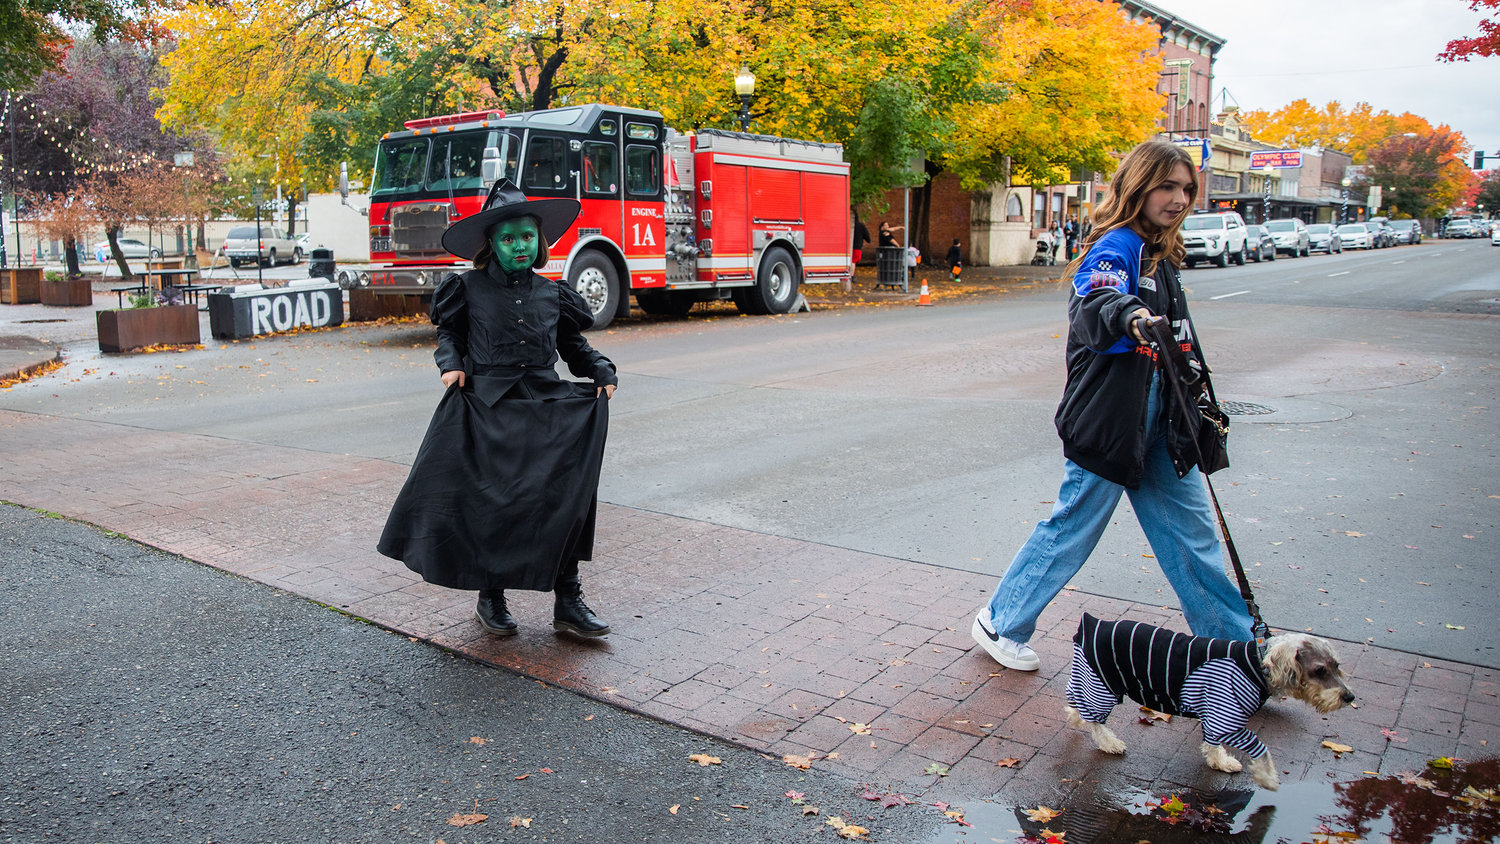 Charlee Potter, 9, walks through downtown Centralia on Monday while dressed as the Wicked Witch of the West for Halloween.